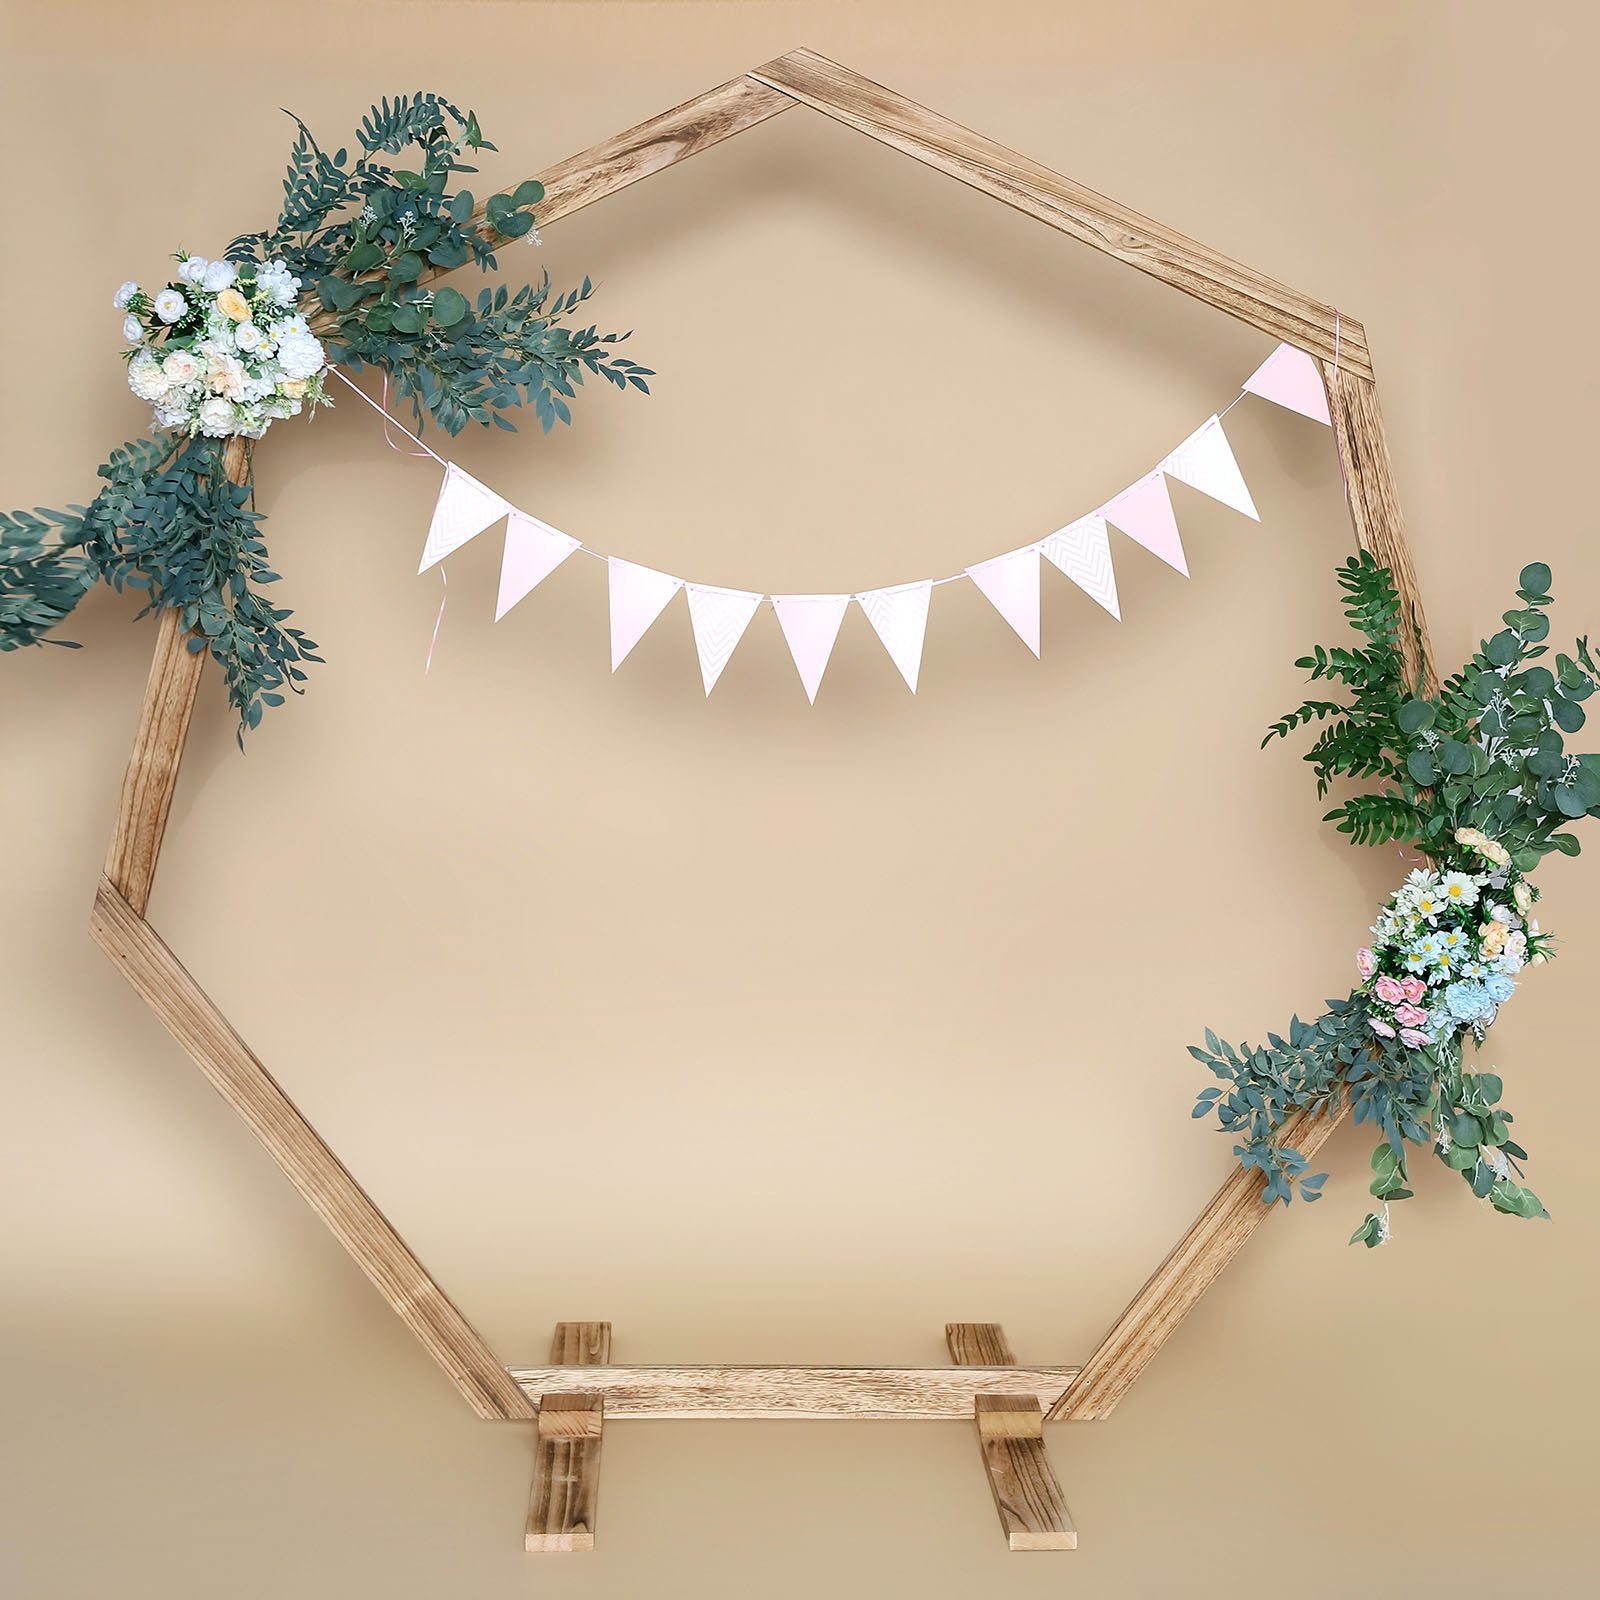 7ft Wooden Wedding Arch Heptagonal Wedding Arbor Photo Booth Backdro Chaircoverfactory